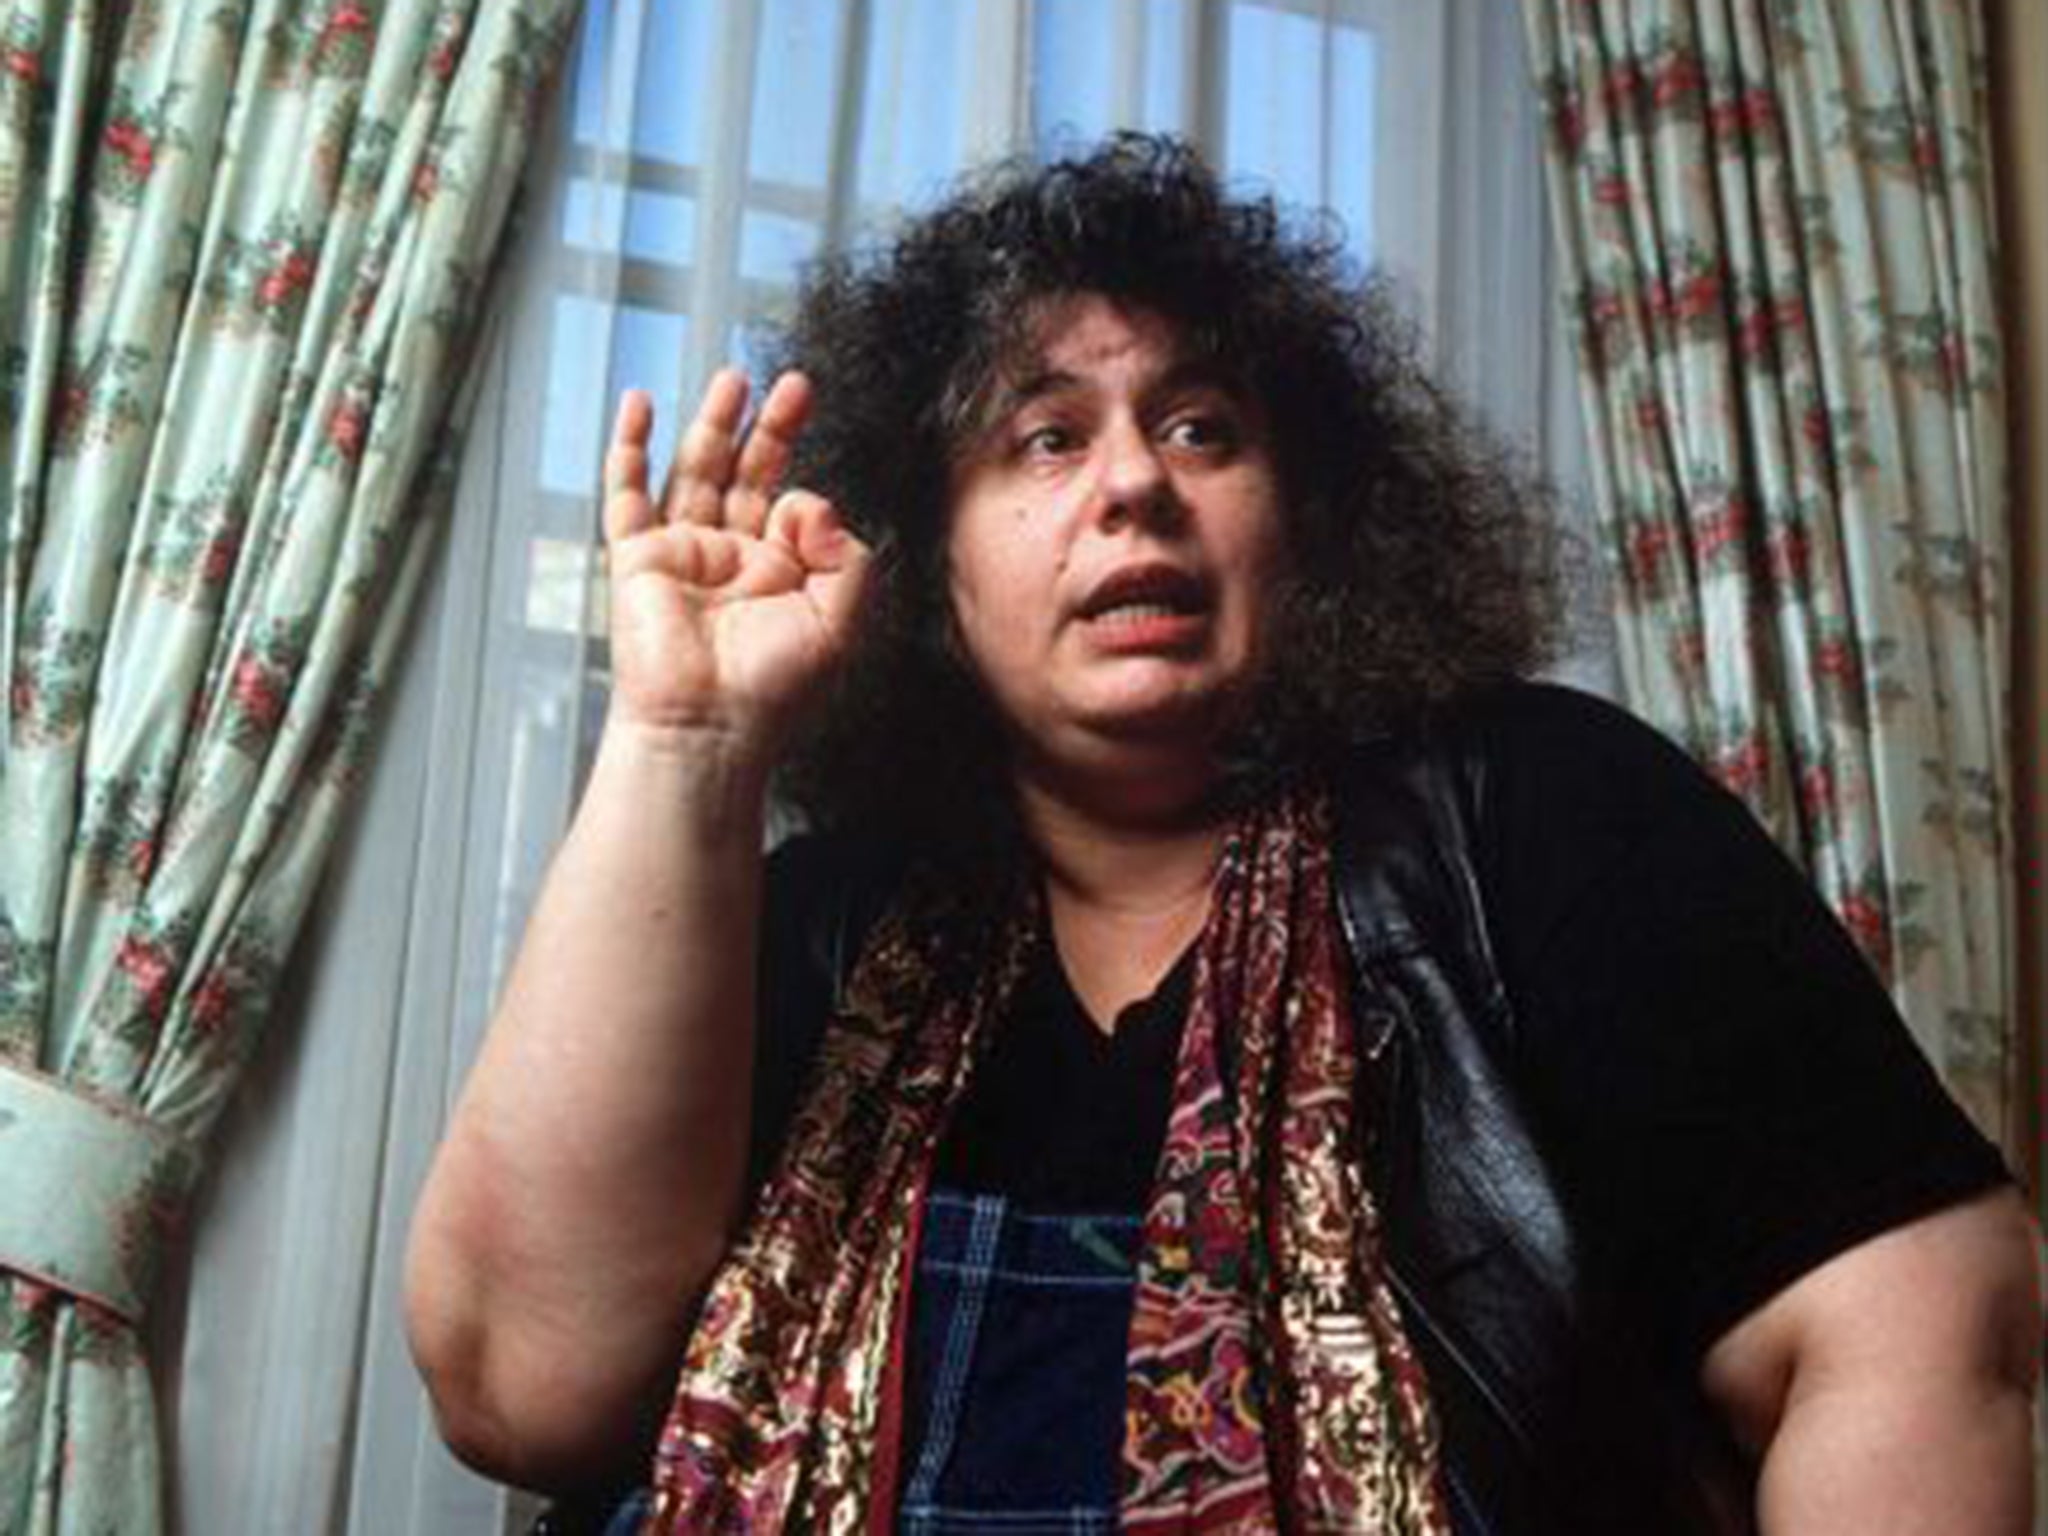 Andrea Dworkin, who sees no contradiction between being a feminist and celebrating trans people